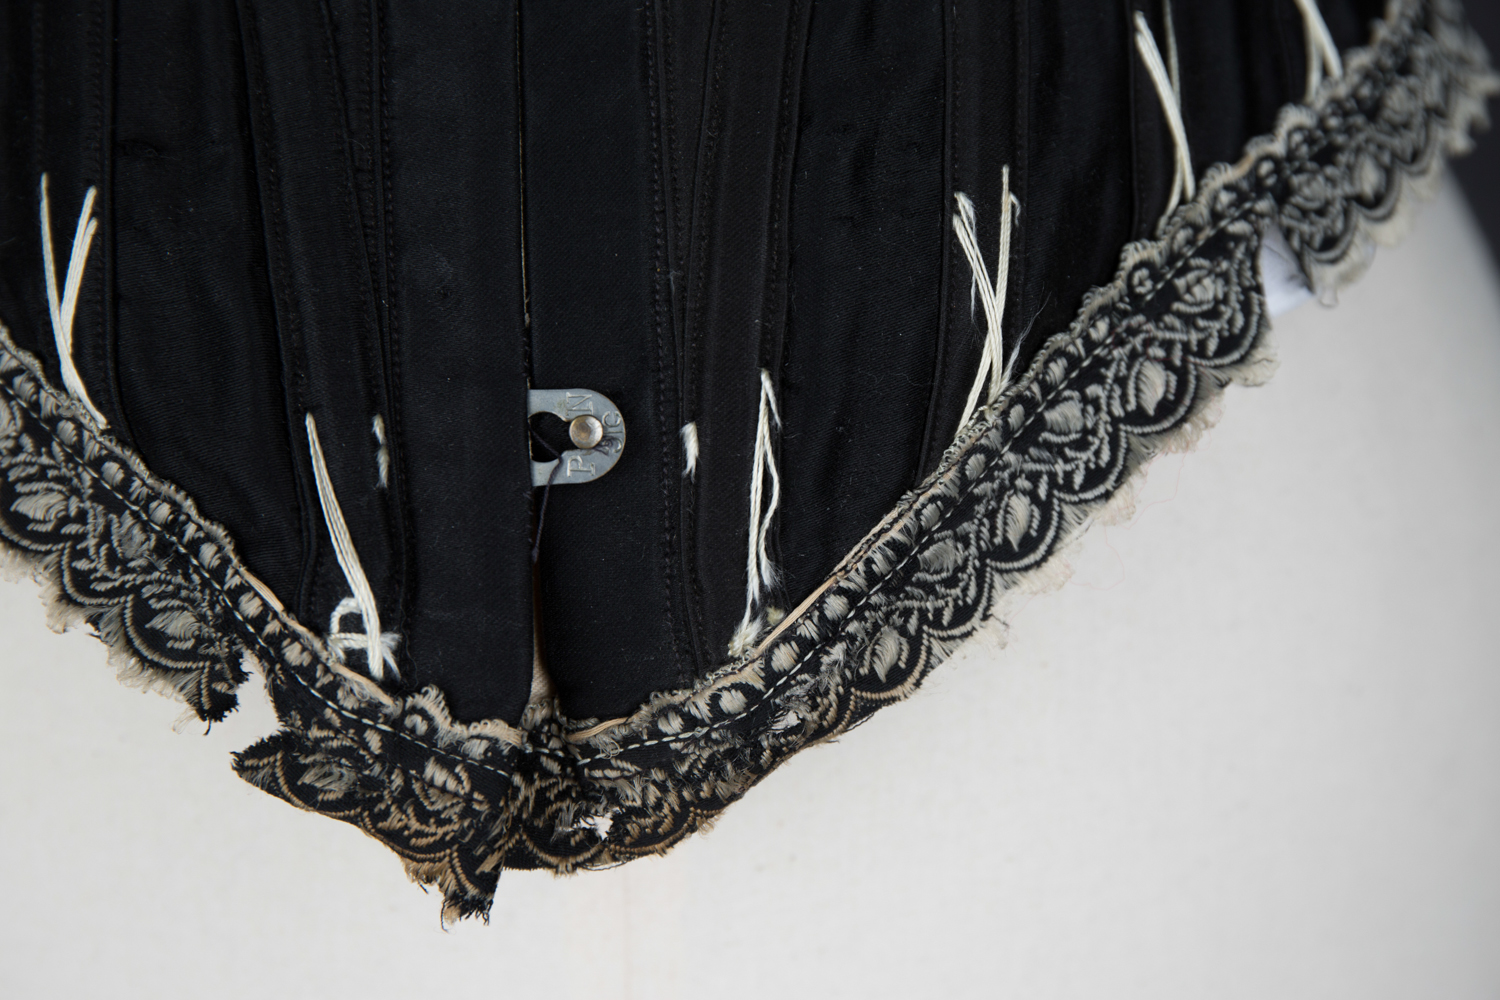 Black Cotton Sateen Corset With White Flossing & Woven Trim by P. N., C. late 1880s - early 1890s, USA. The Underpinnings Museum. Photography by Karolina Laskowska